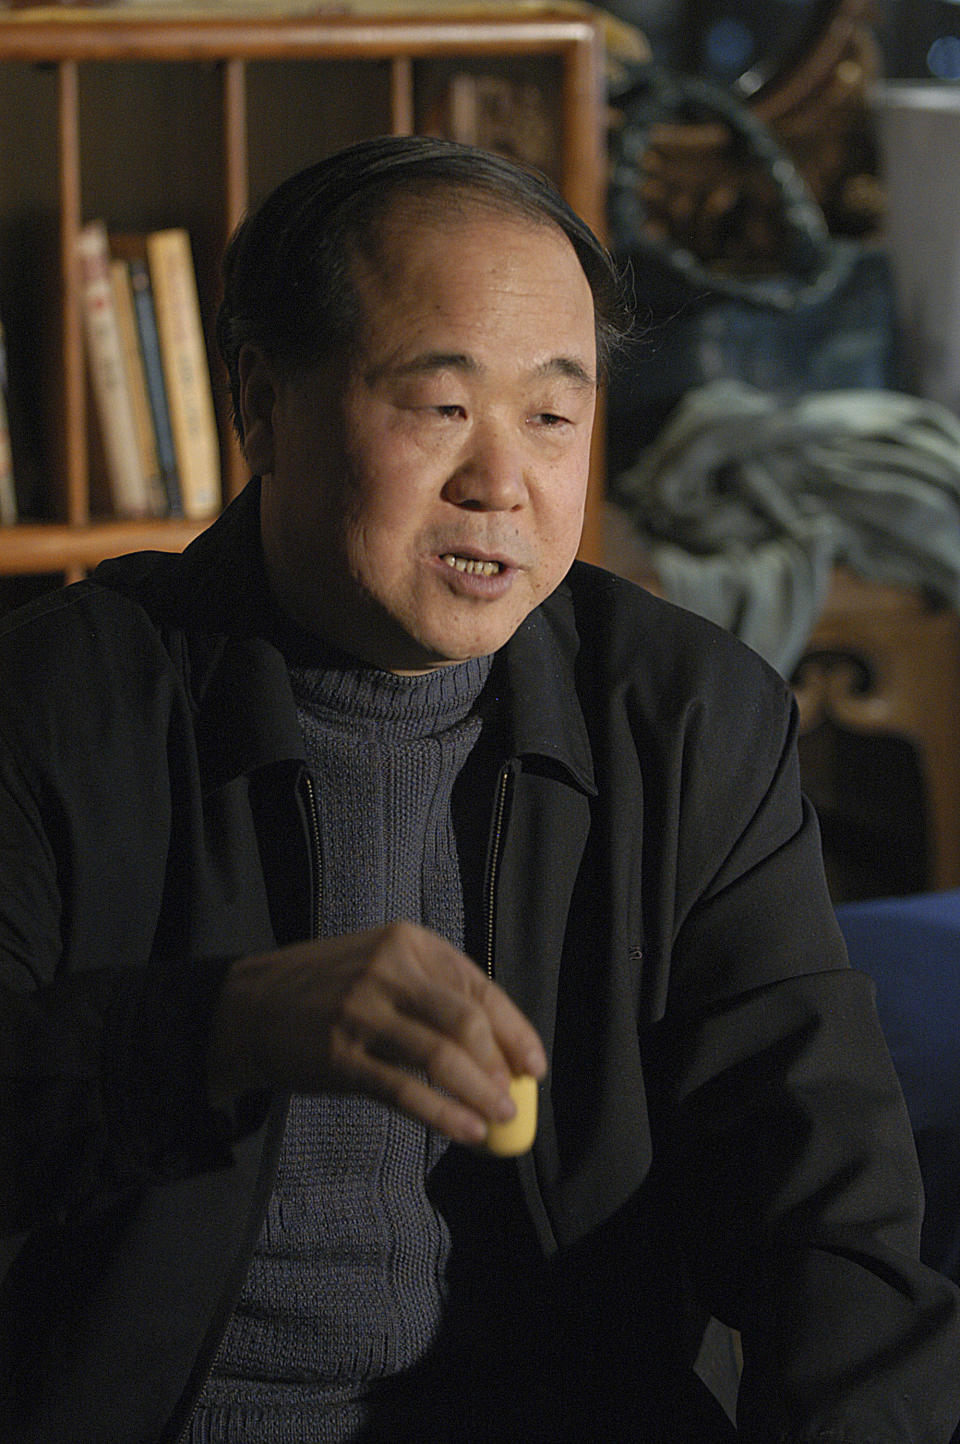 In this photo taken on Tuesday, Dec. 27, 2005, Chinese writer Mo Yan reacts during an interview in Beijing, China. Mo won the Nobel Prize in literature on Thursday, Oct. 11, 2012, a somewhat unexpected choice by a prize committee that has favored European authors in recent years. (AP Photo) CHINA OUT